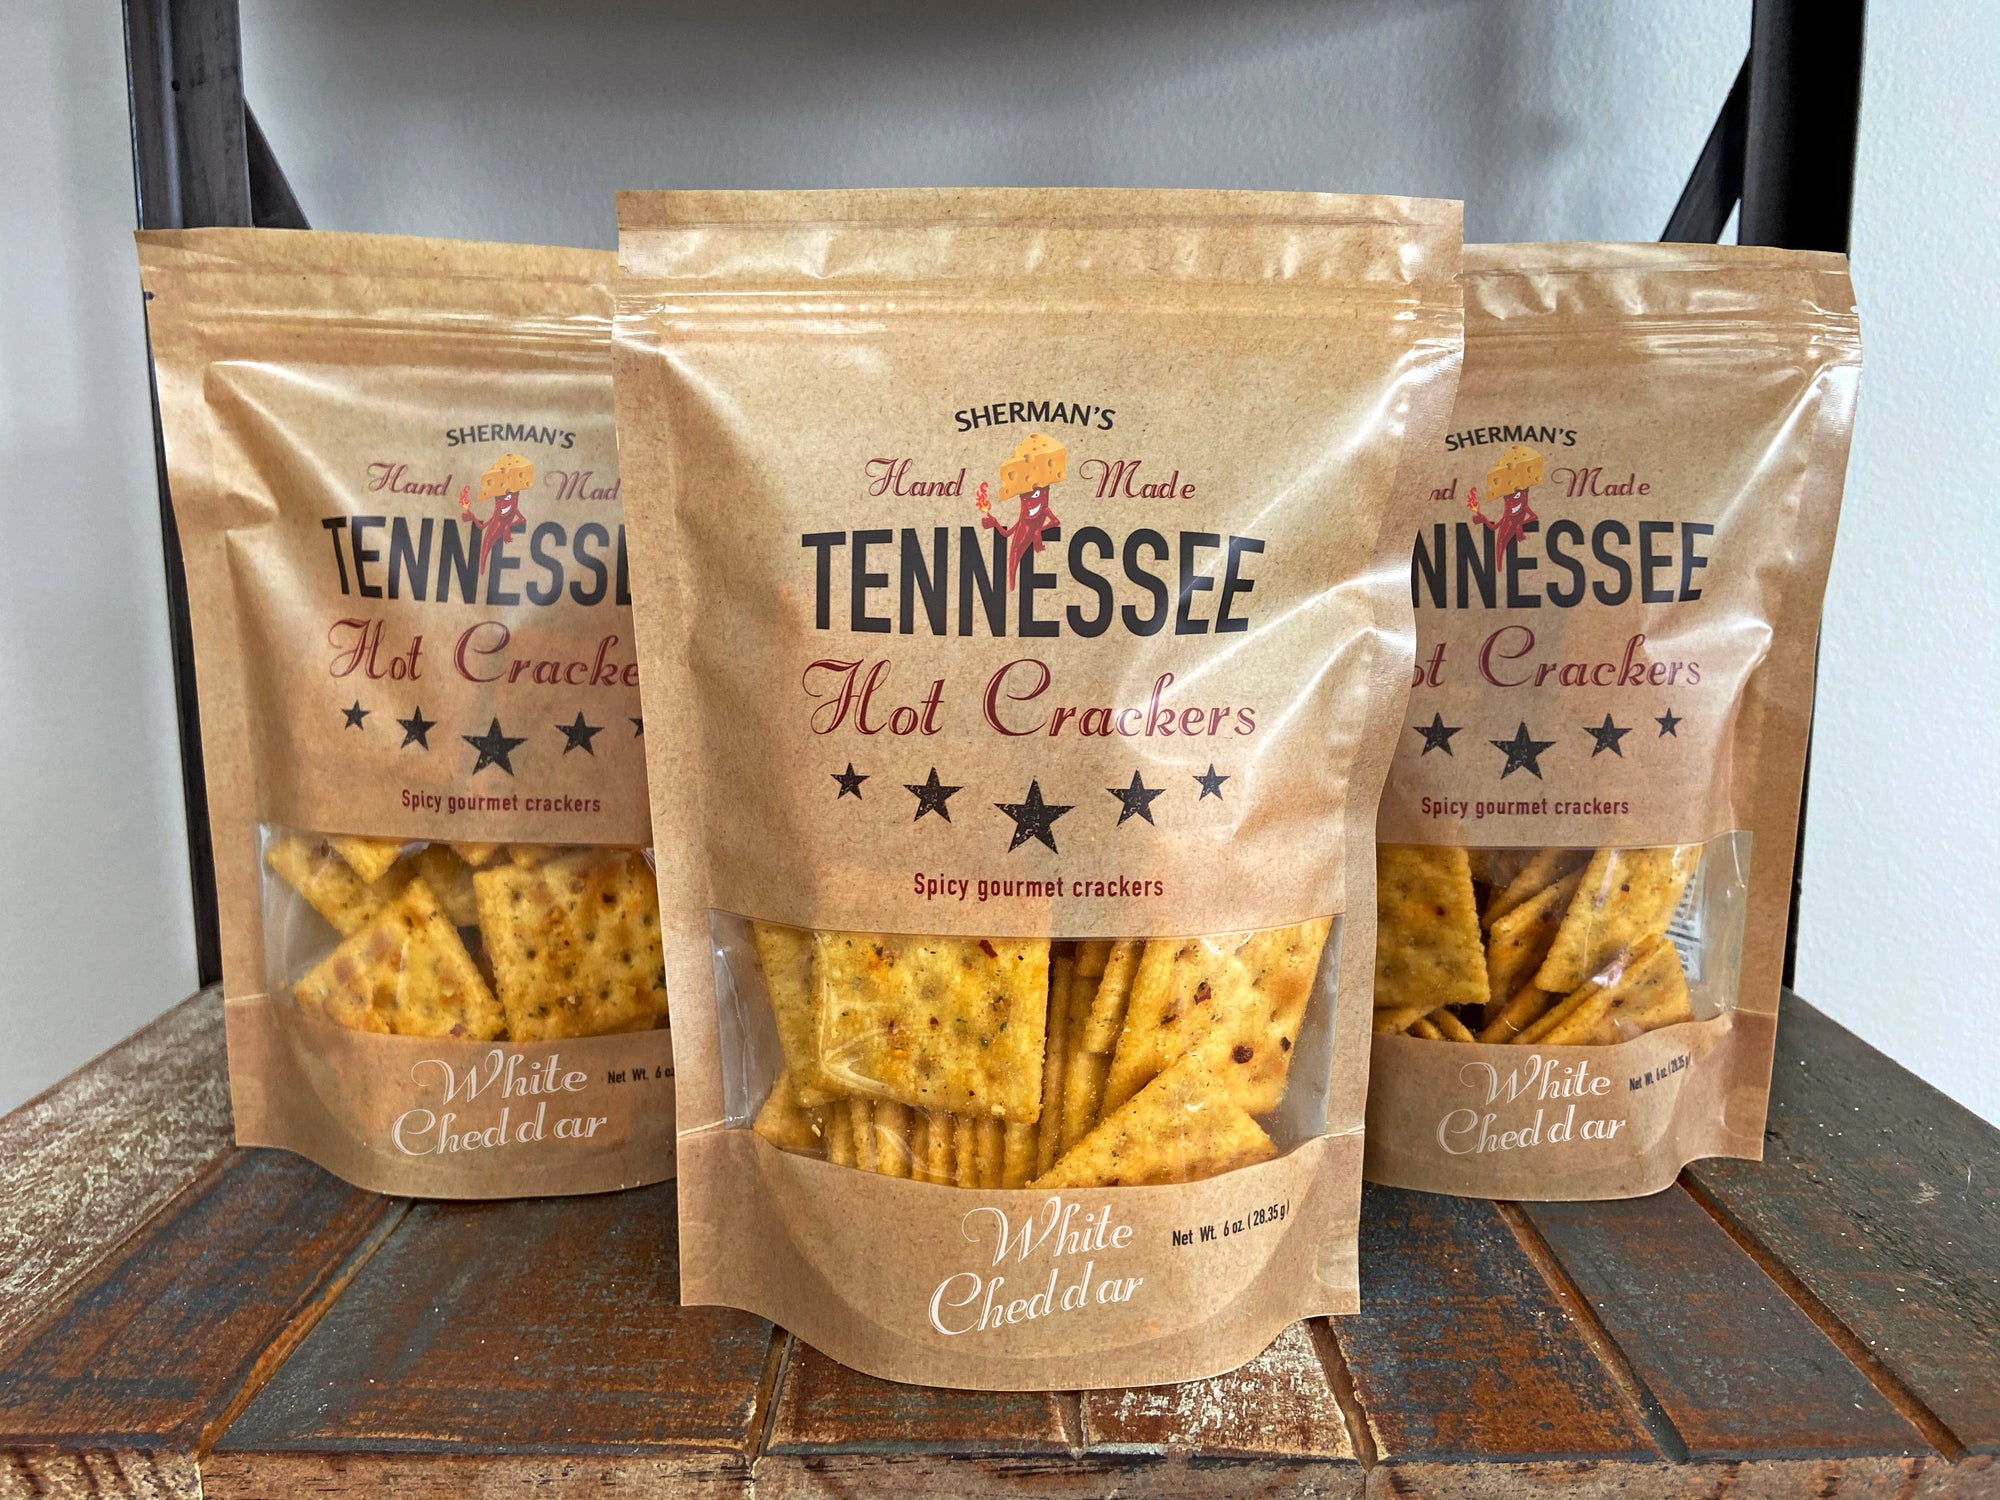 Sherman's Tennessee Hot Crackers, White Cheddar Flavor